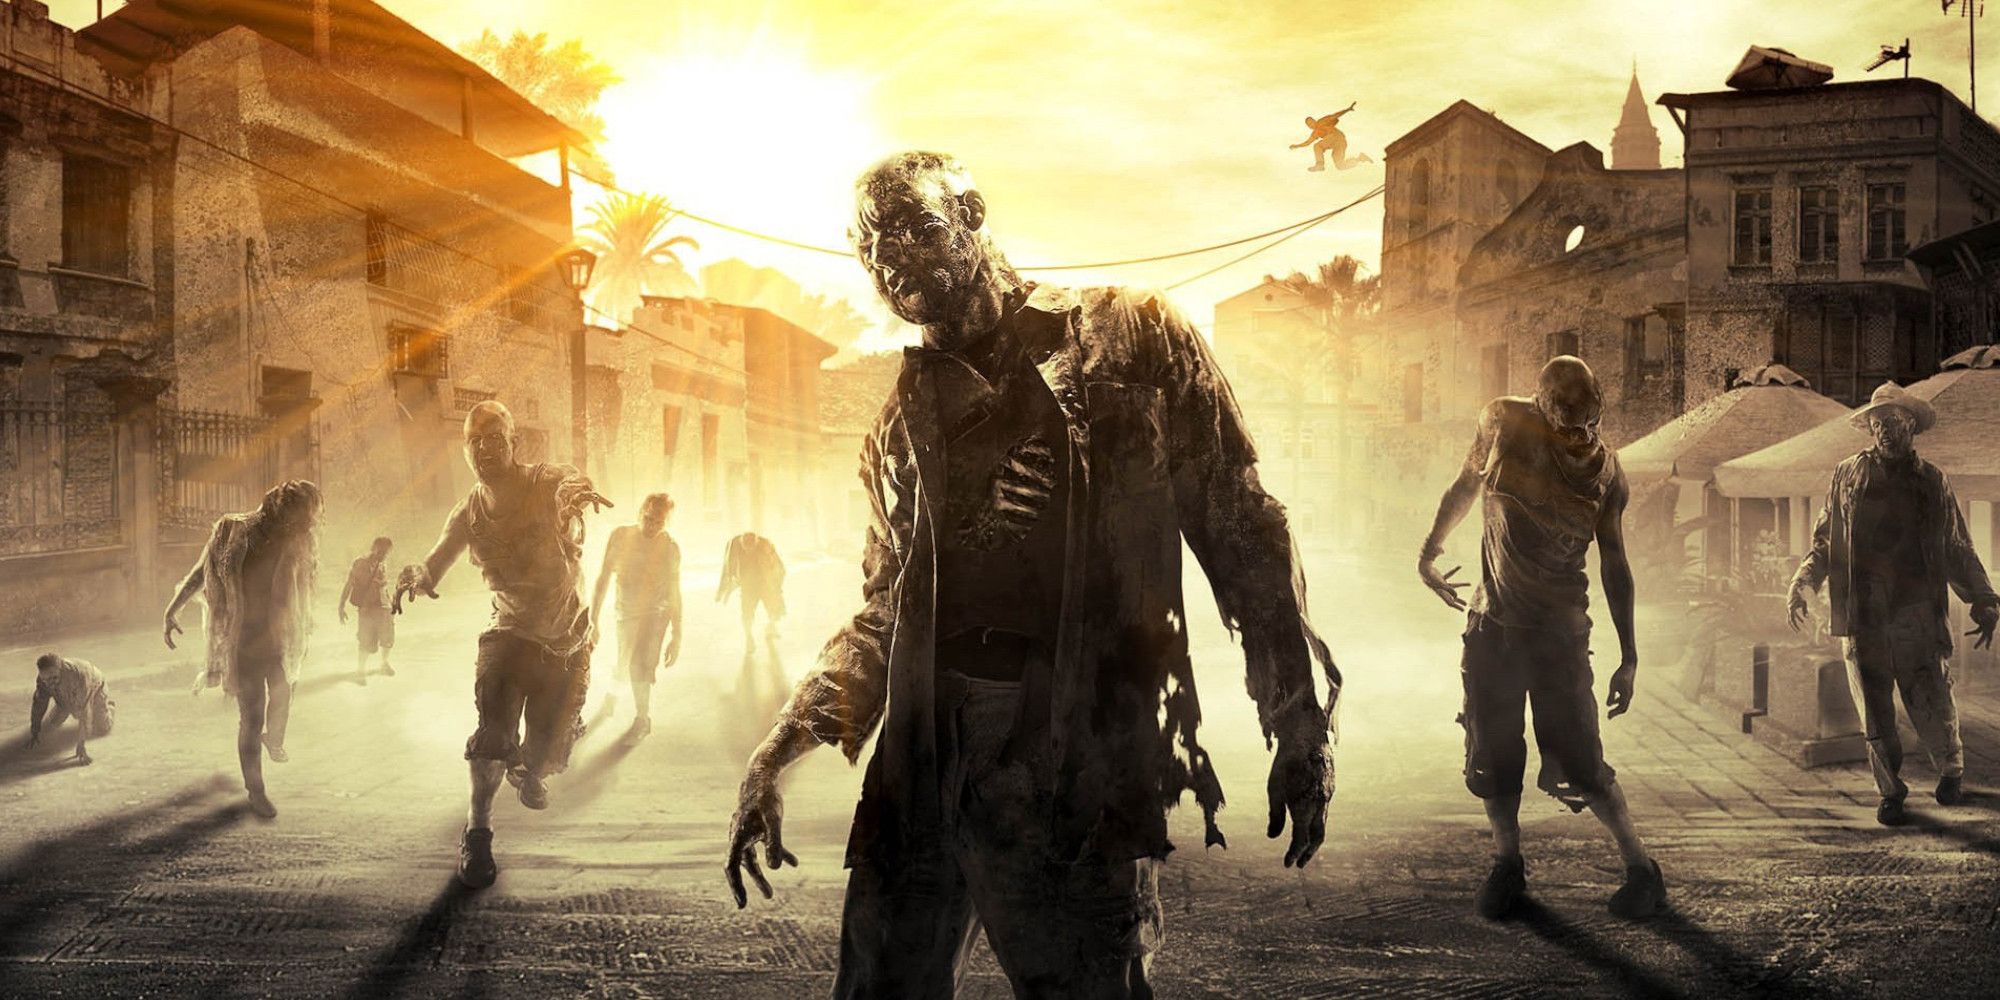 A group of zombies stand menacingly on a city street